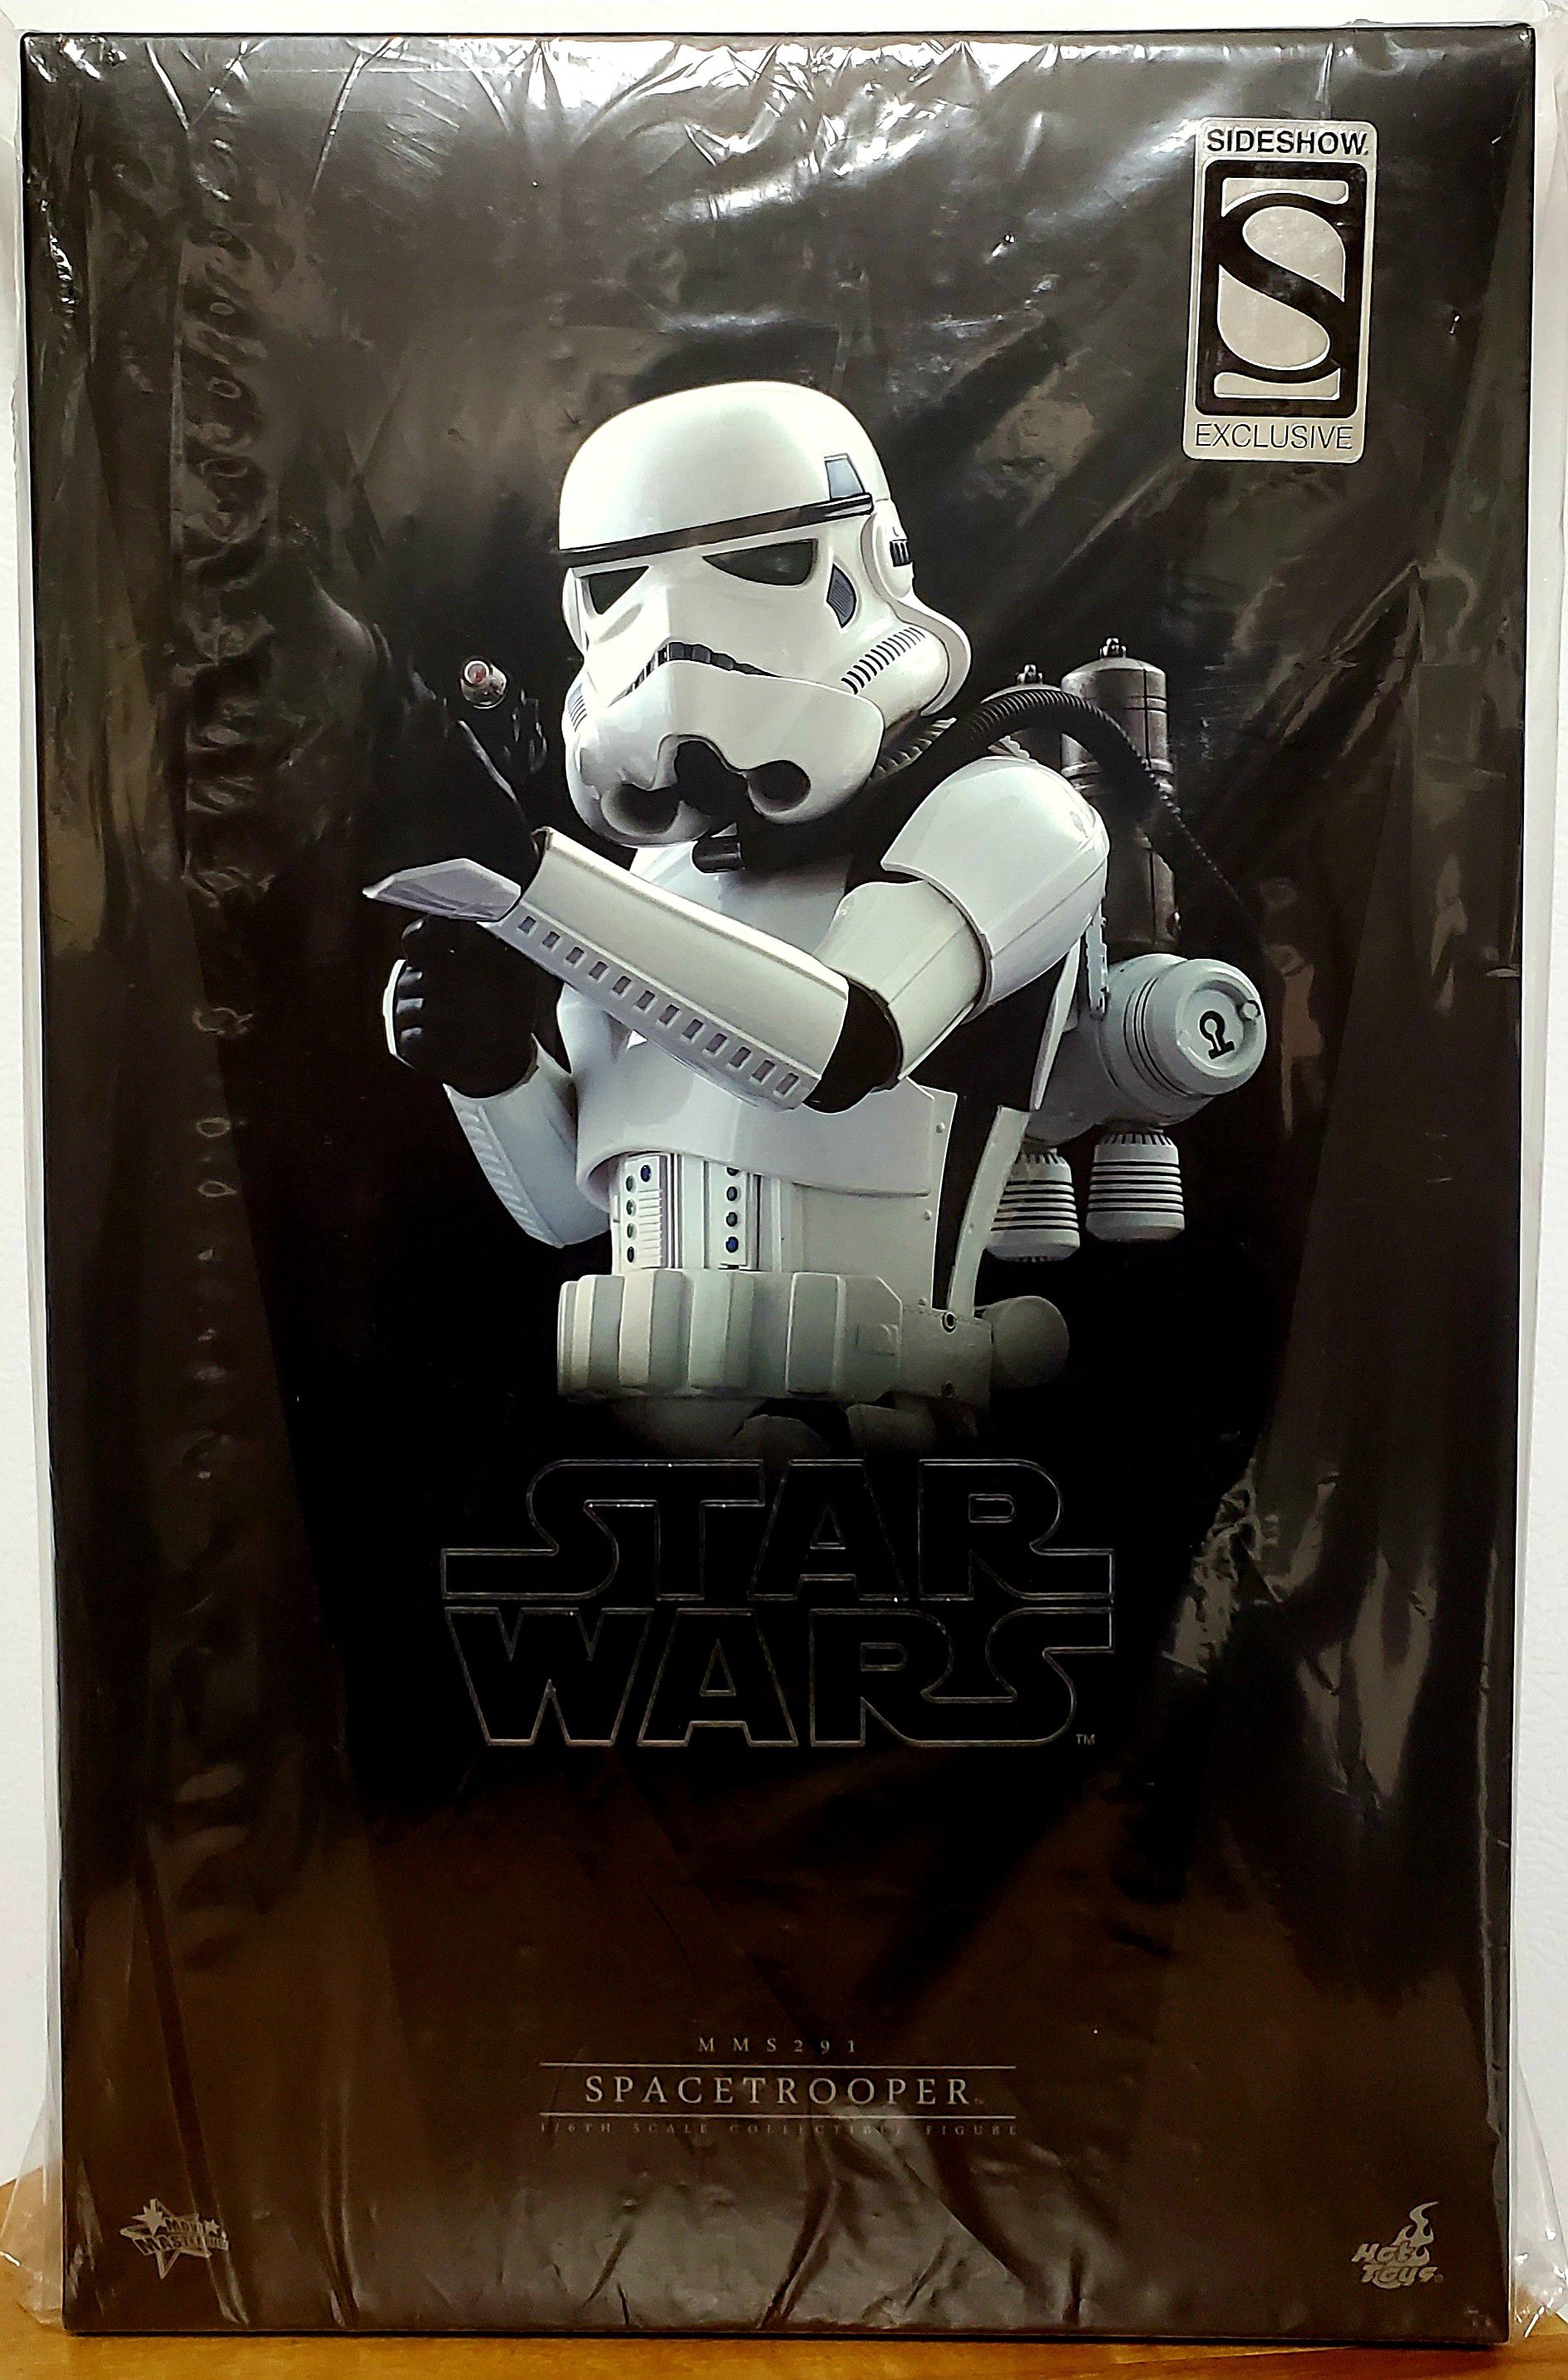 Hot Toys / Sideshow Collectibles Exclusive Star Wars: A New Hope SPACETROOPER (MMS291) 1/6 scale collectible figure (New in box!)